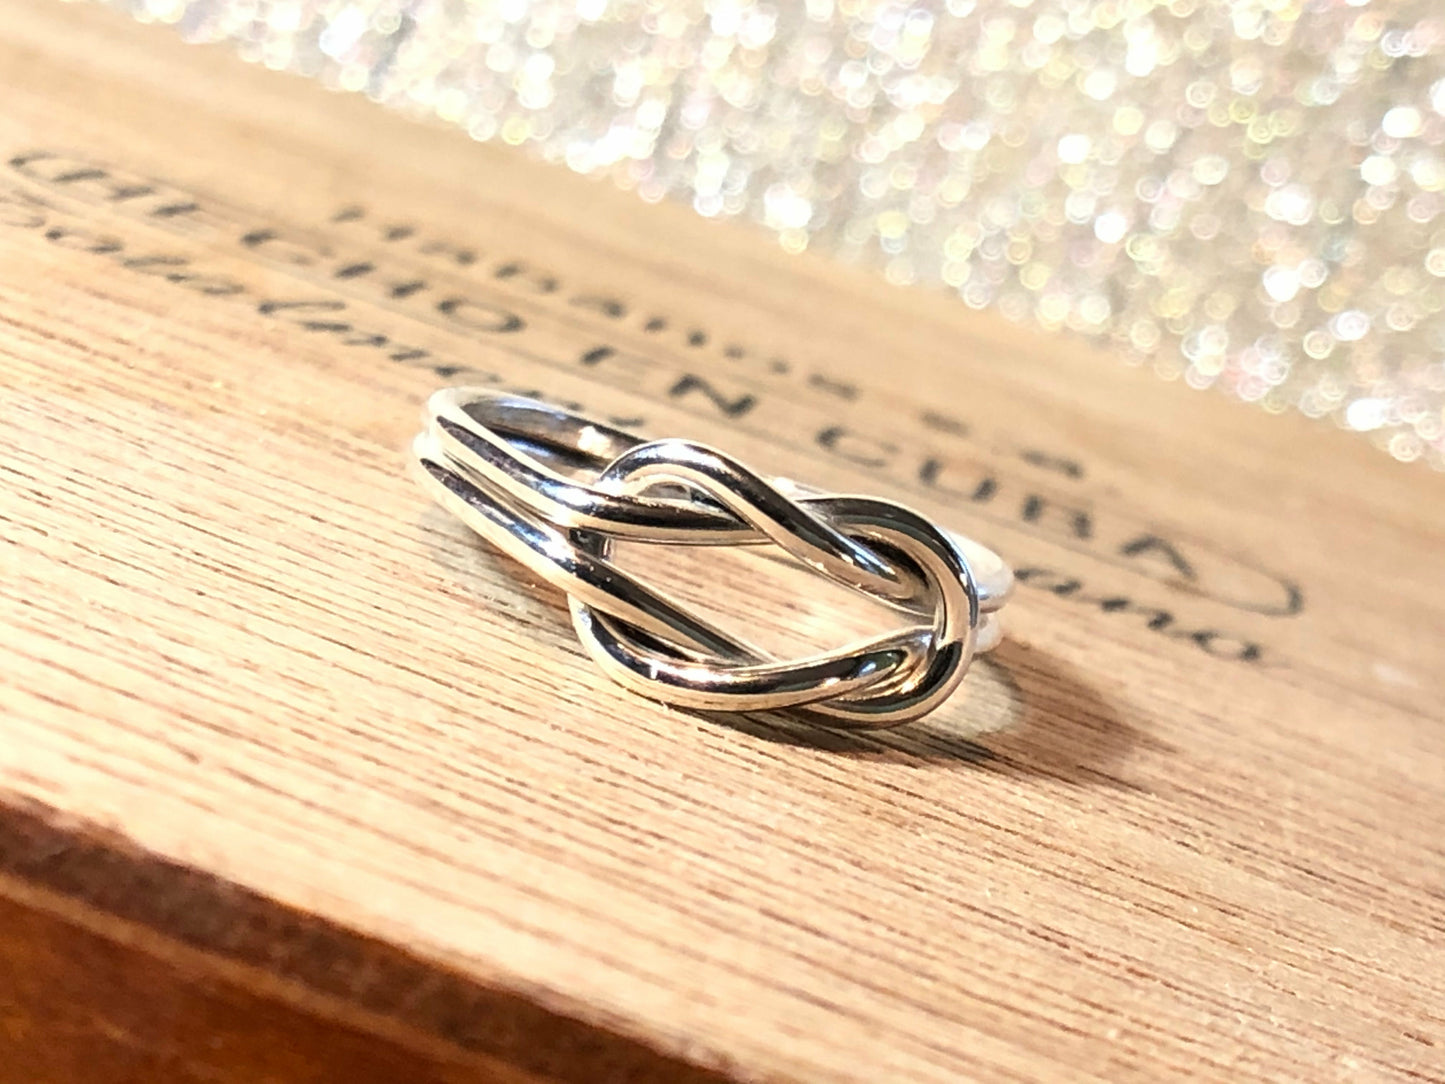 sterling-silver-knot-ring-sterling-silver-ring-tie-the-knot-ring-love-jewelry-infinity-ring-bridesmaid-gift-valentines-day-gift-gift-for-her